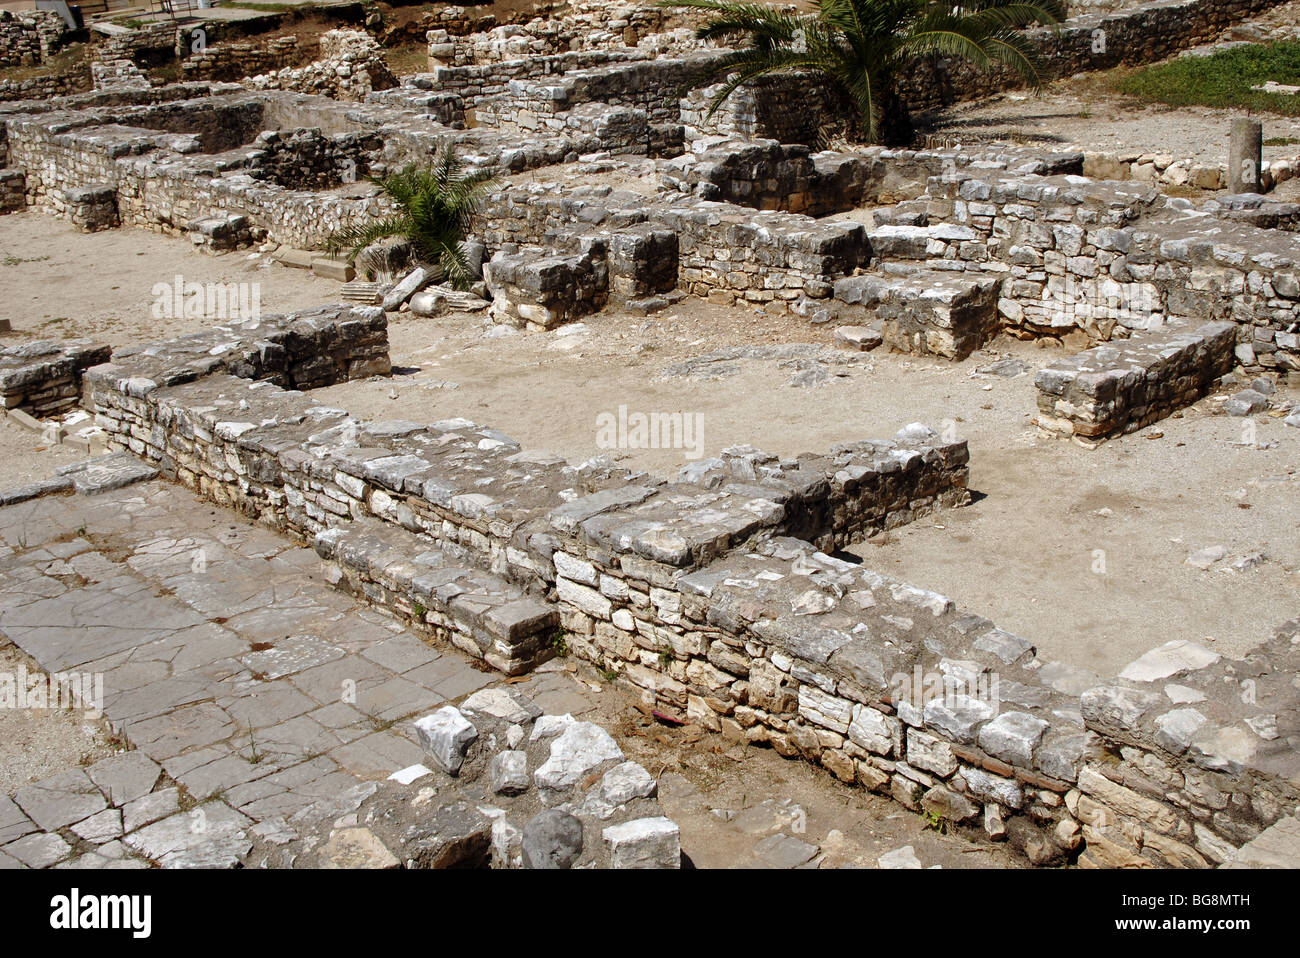 HEBREW ART. REPUBLIC OF ALBANIA. Archaeological remains of the ancient synagogue dating from the V-VI. Saranda. Stock Photo